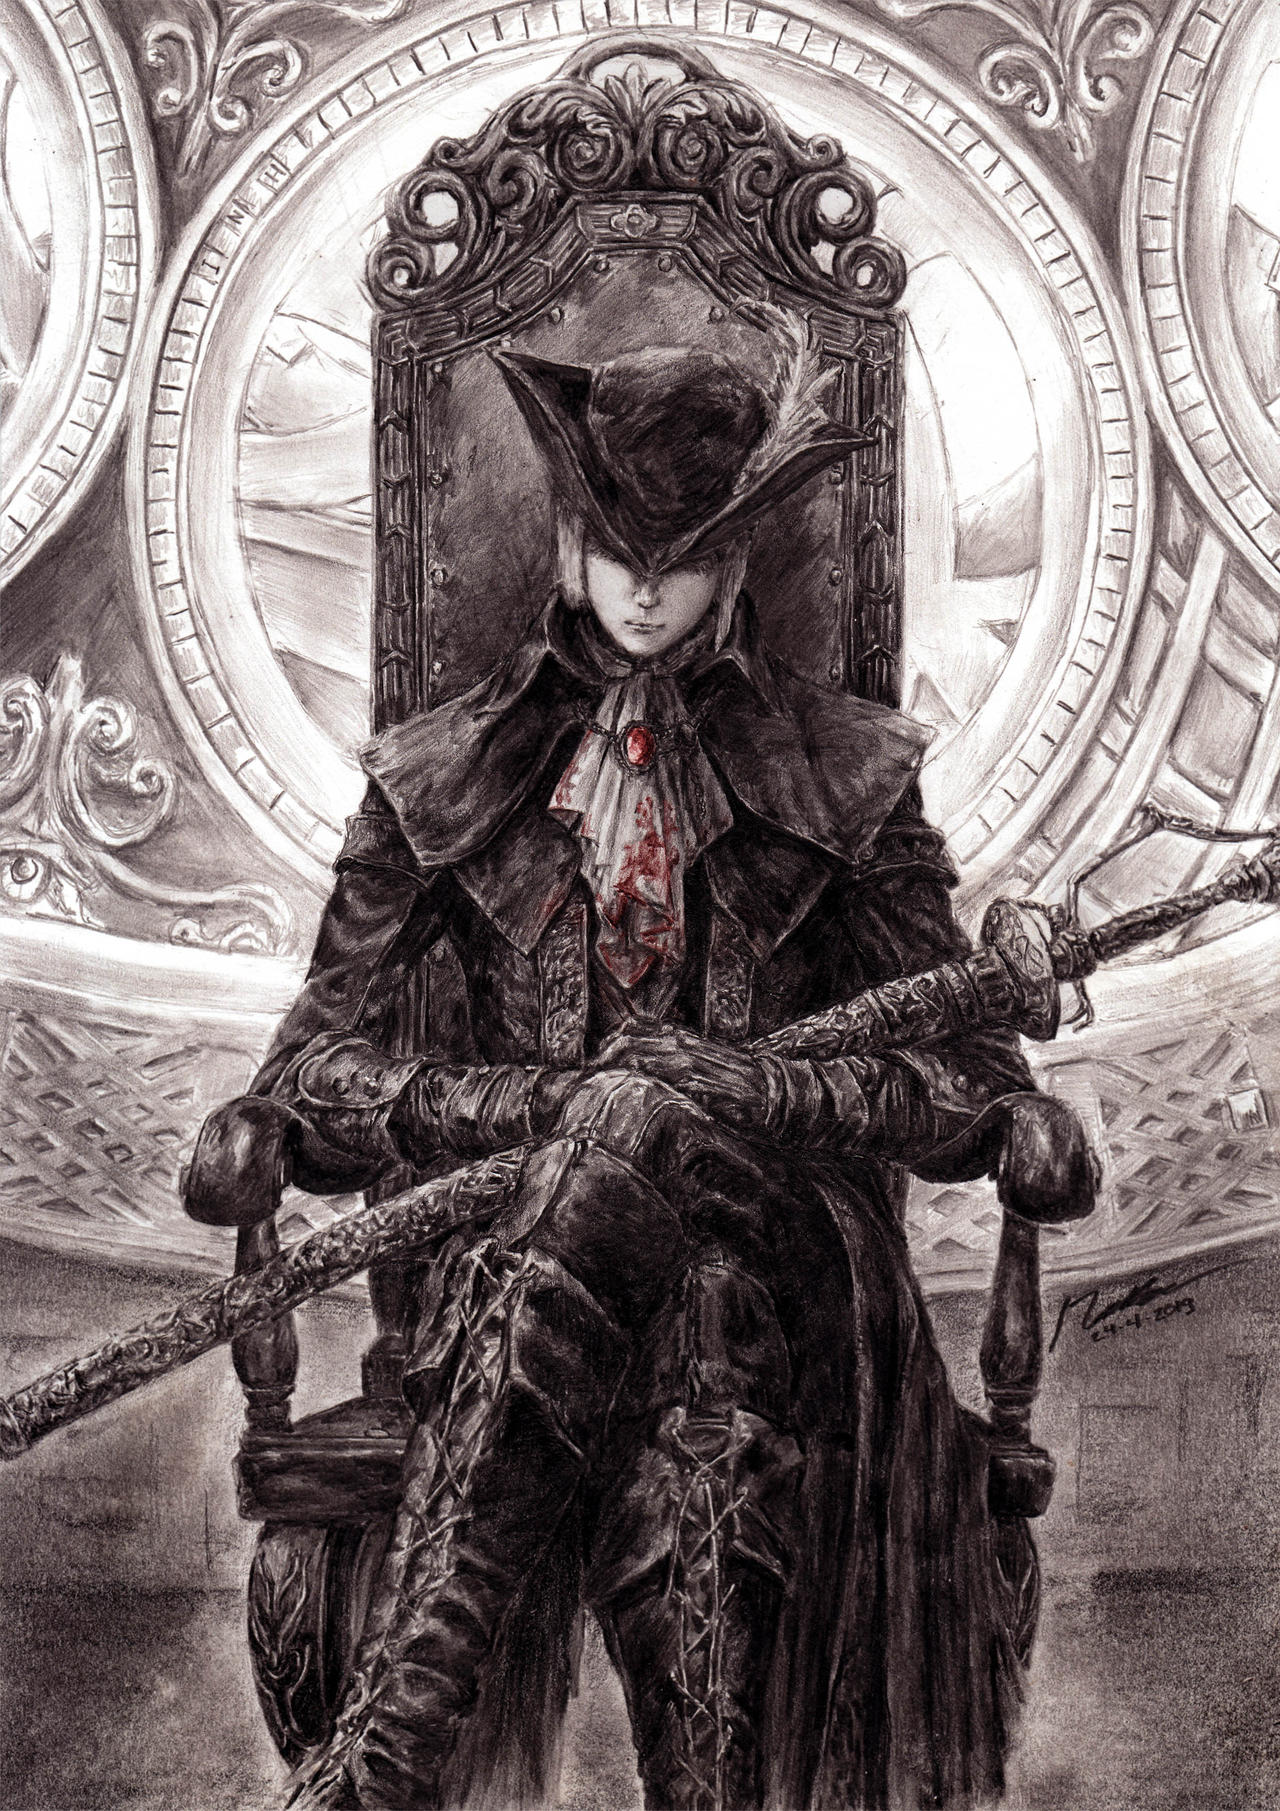 Lady Maria of the Astral Clocktower by INH99 on DeviantArt